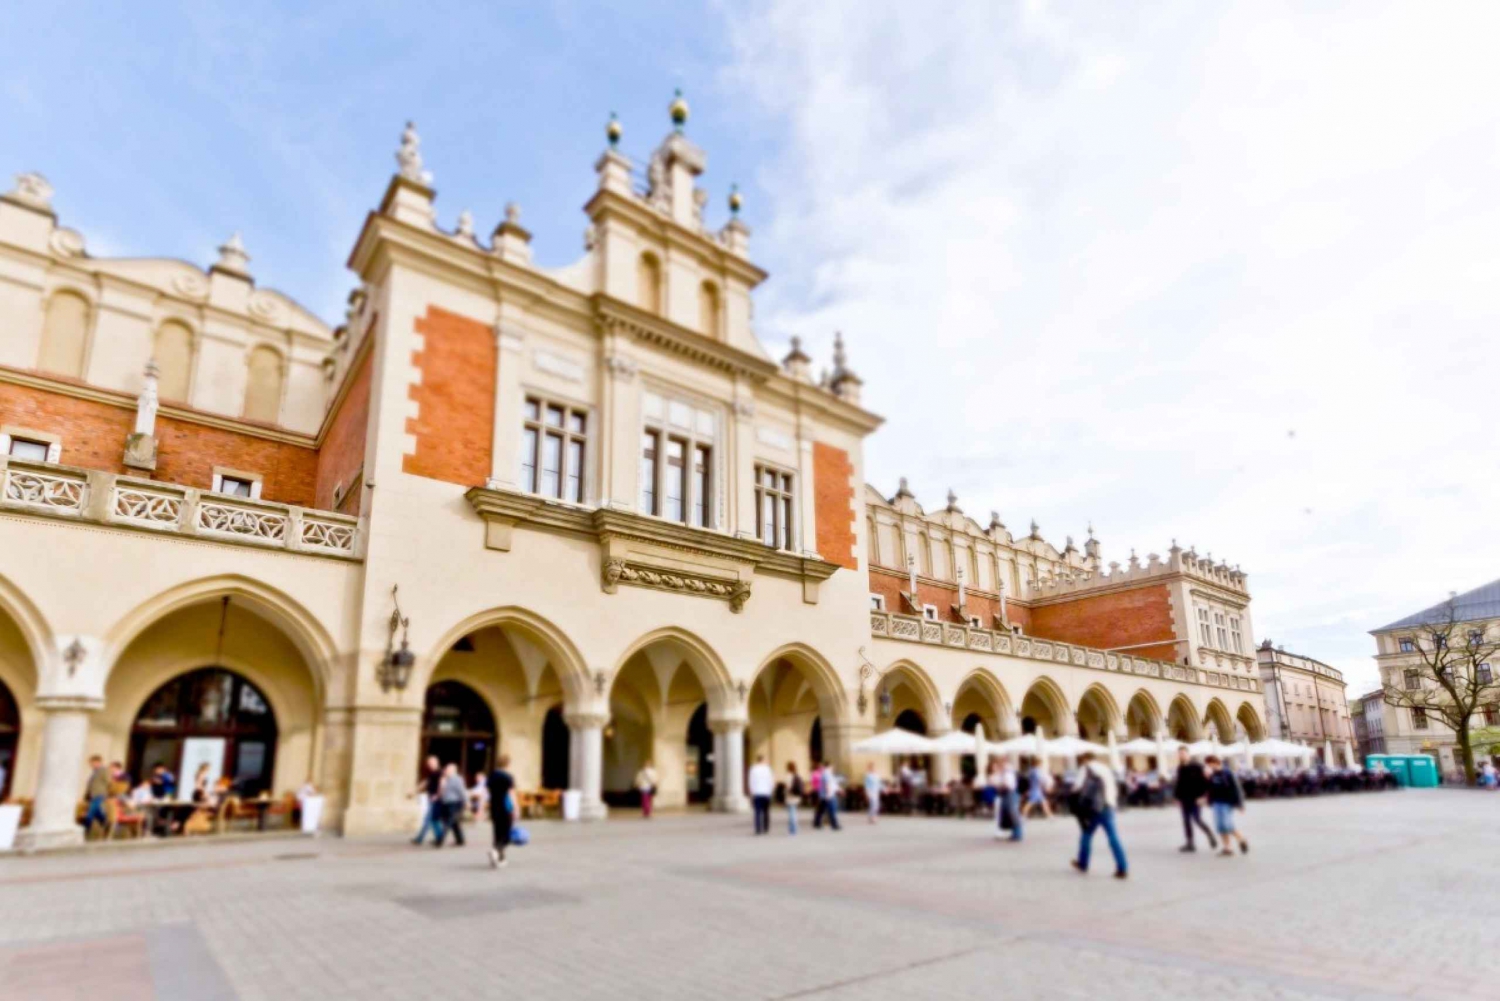 Krakow: Self-Guided Outdoor Escape Game